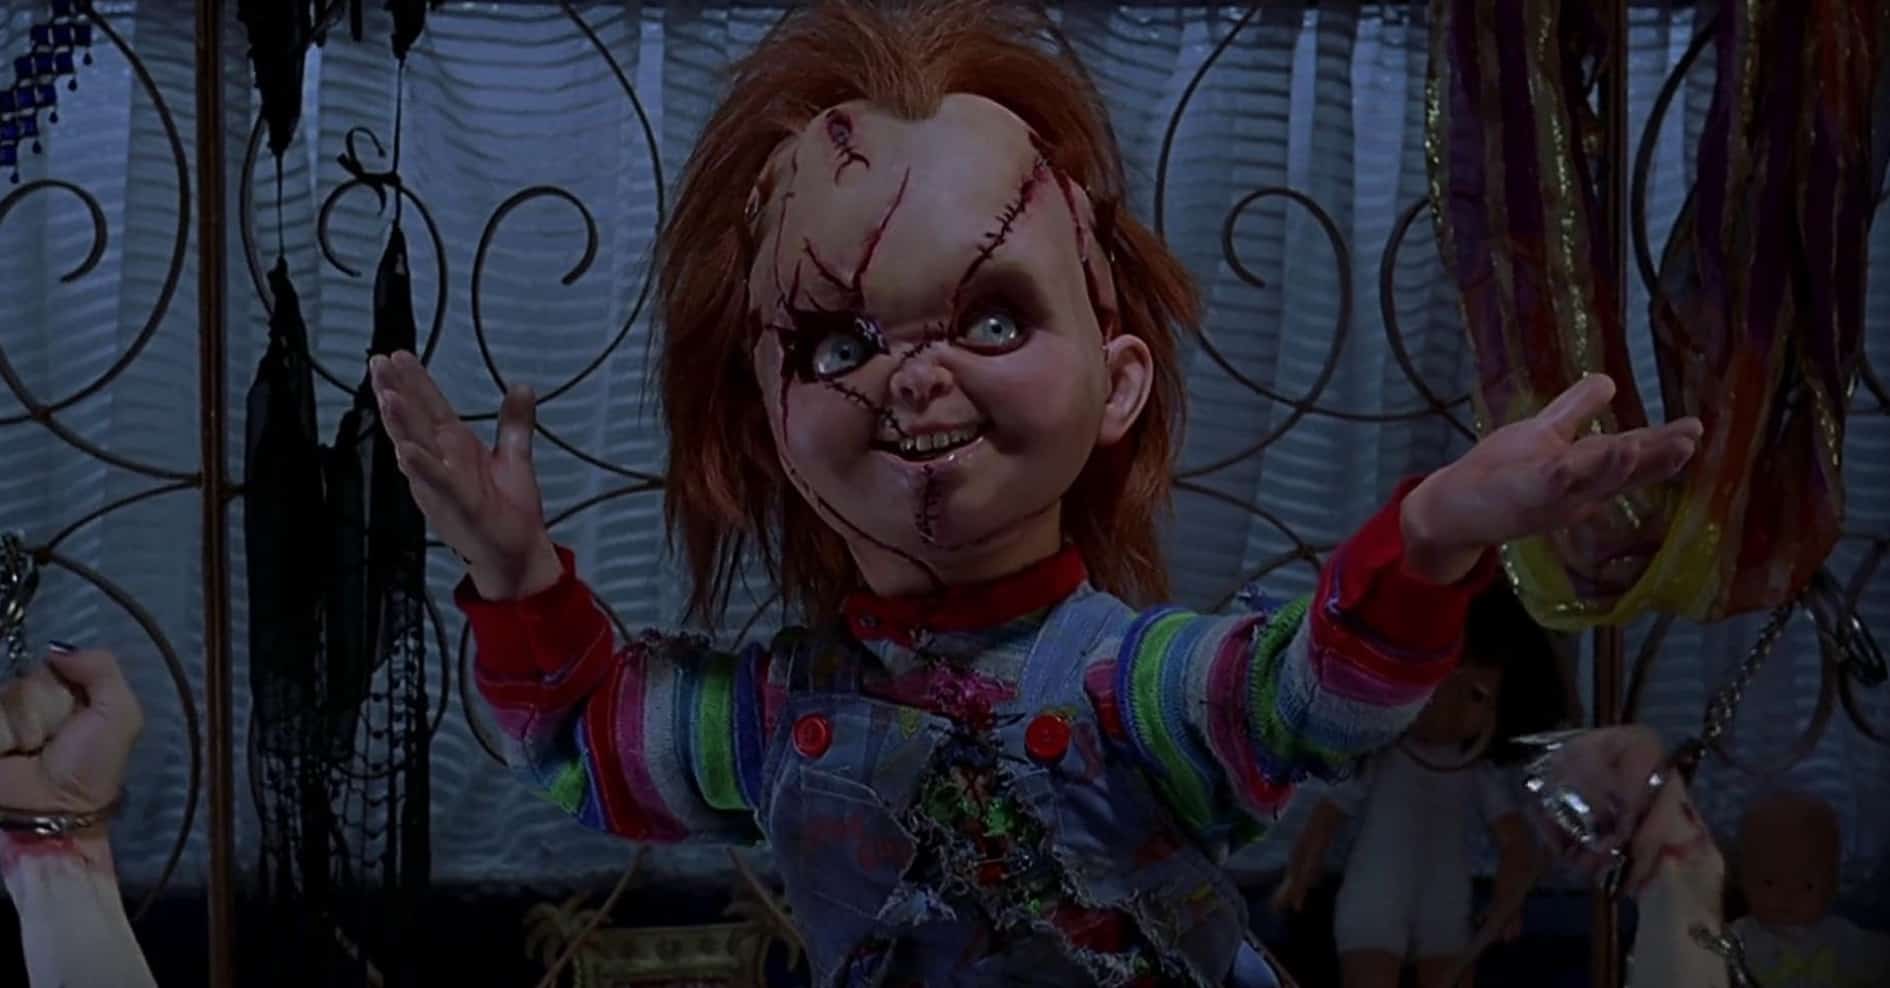 A scarred doll sits atop a handcuffed man in this image from Universal Pictures.